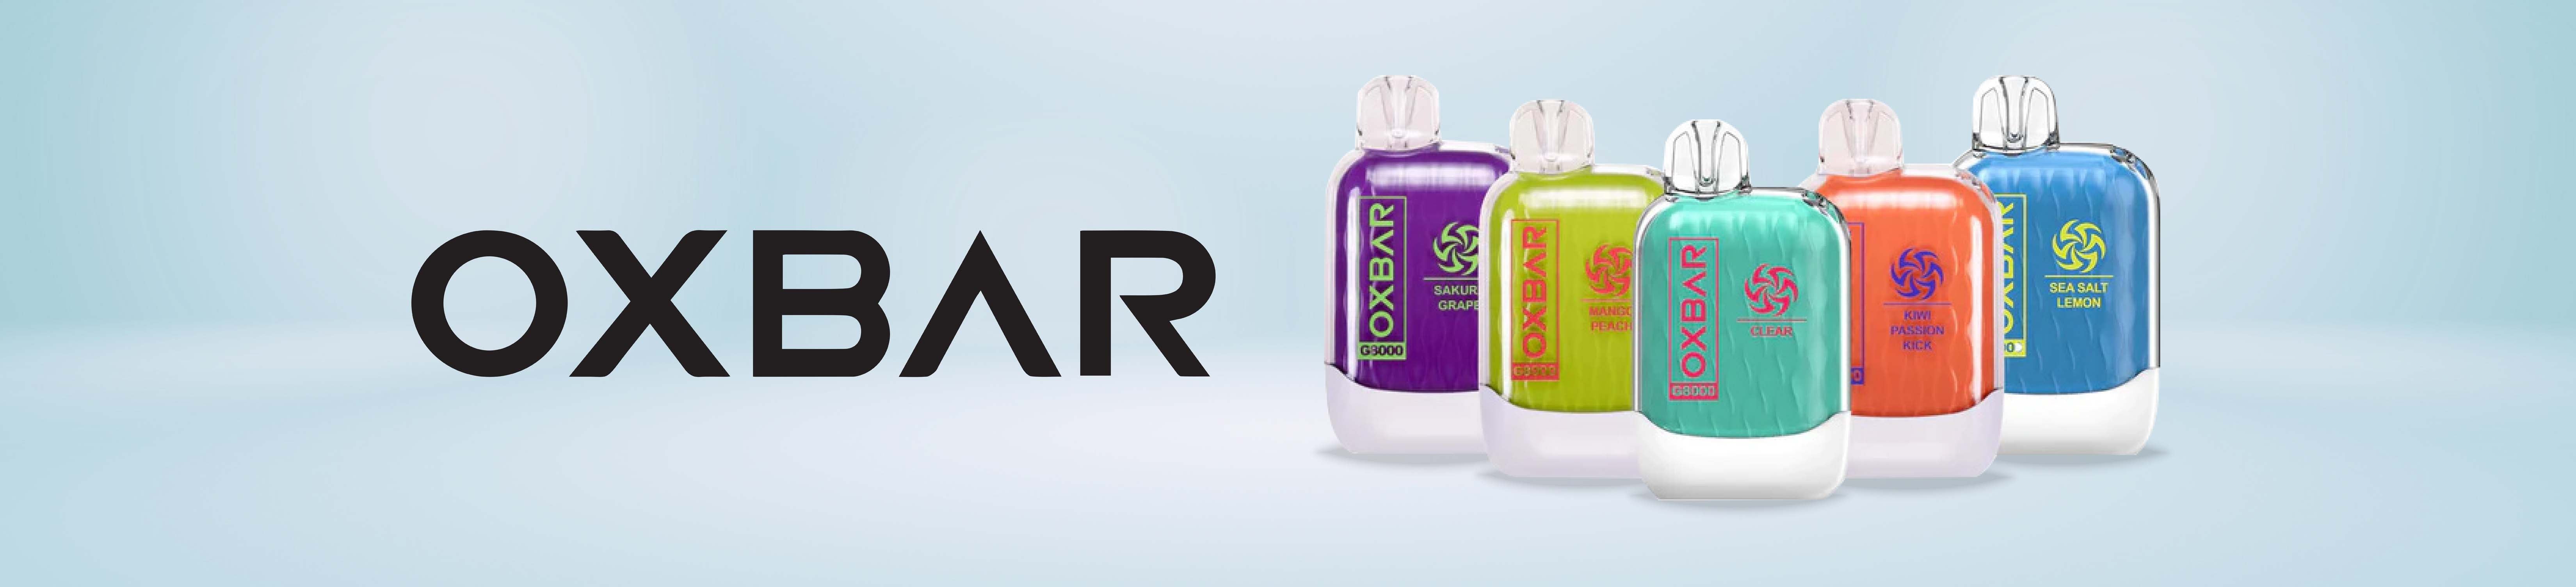 Oxbar Vapes Collection Banner